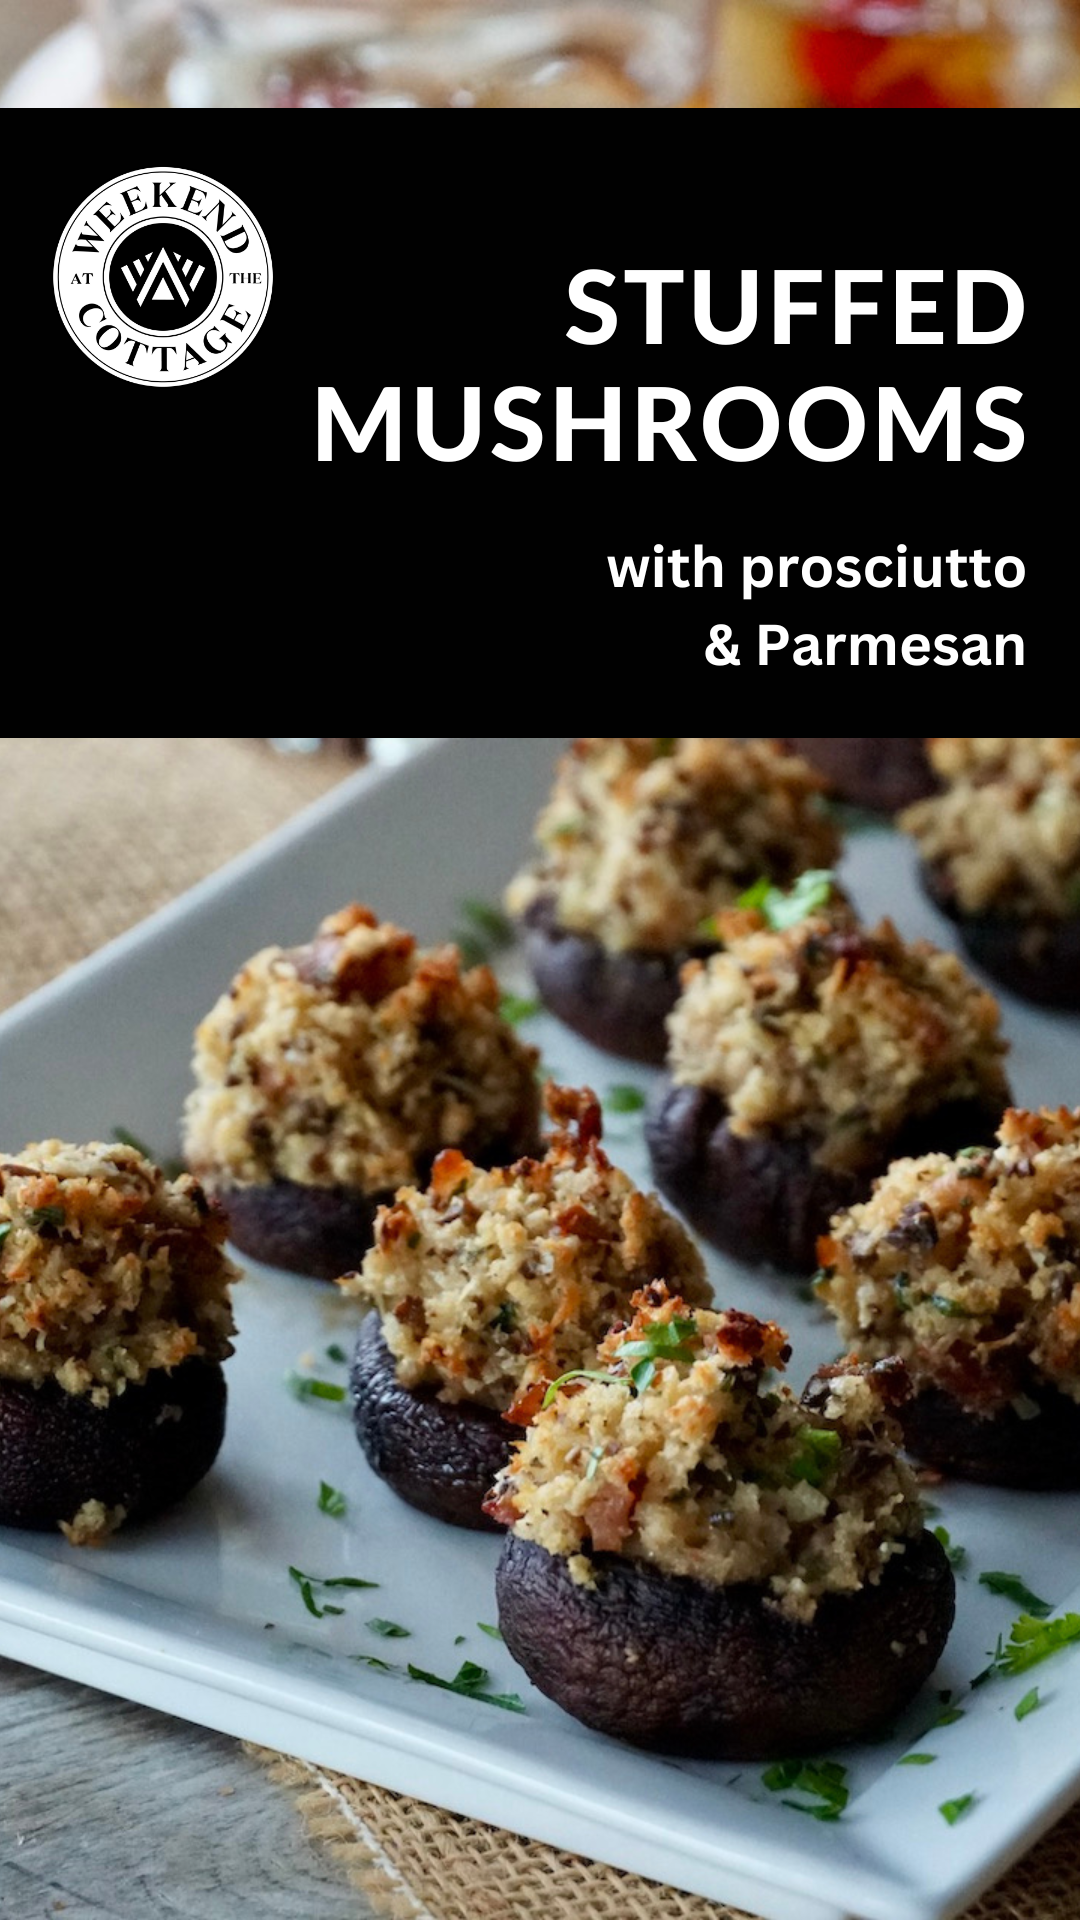 Stuffed Mushrooms with prosciutto and Parmesan